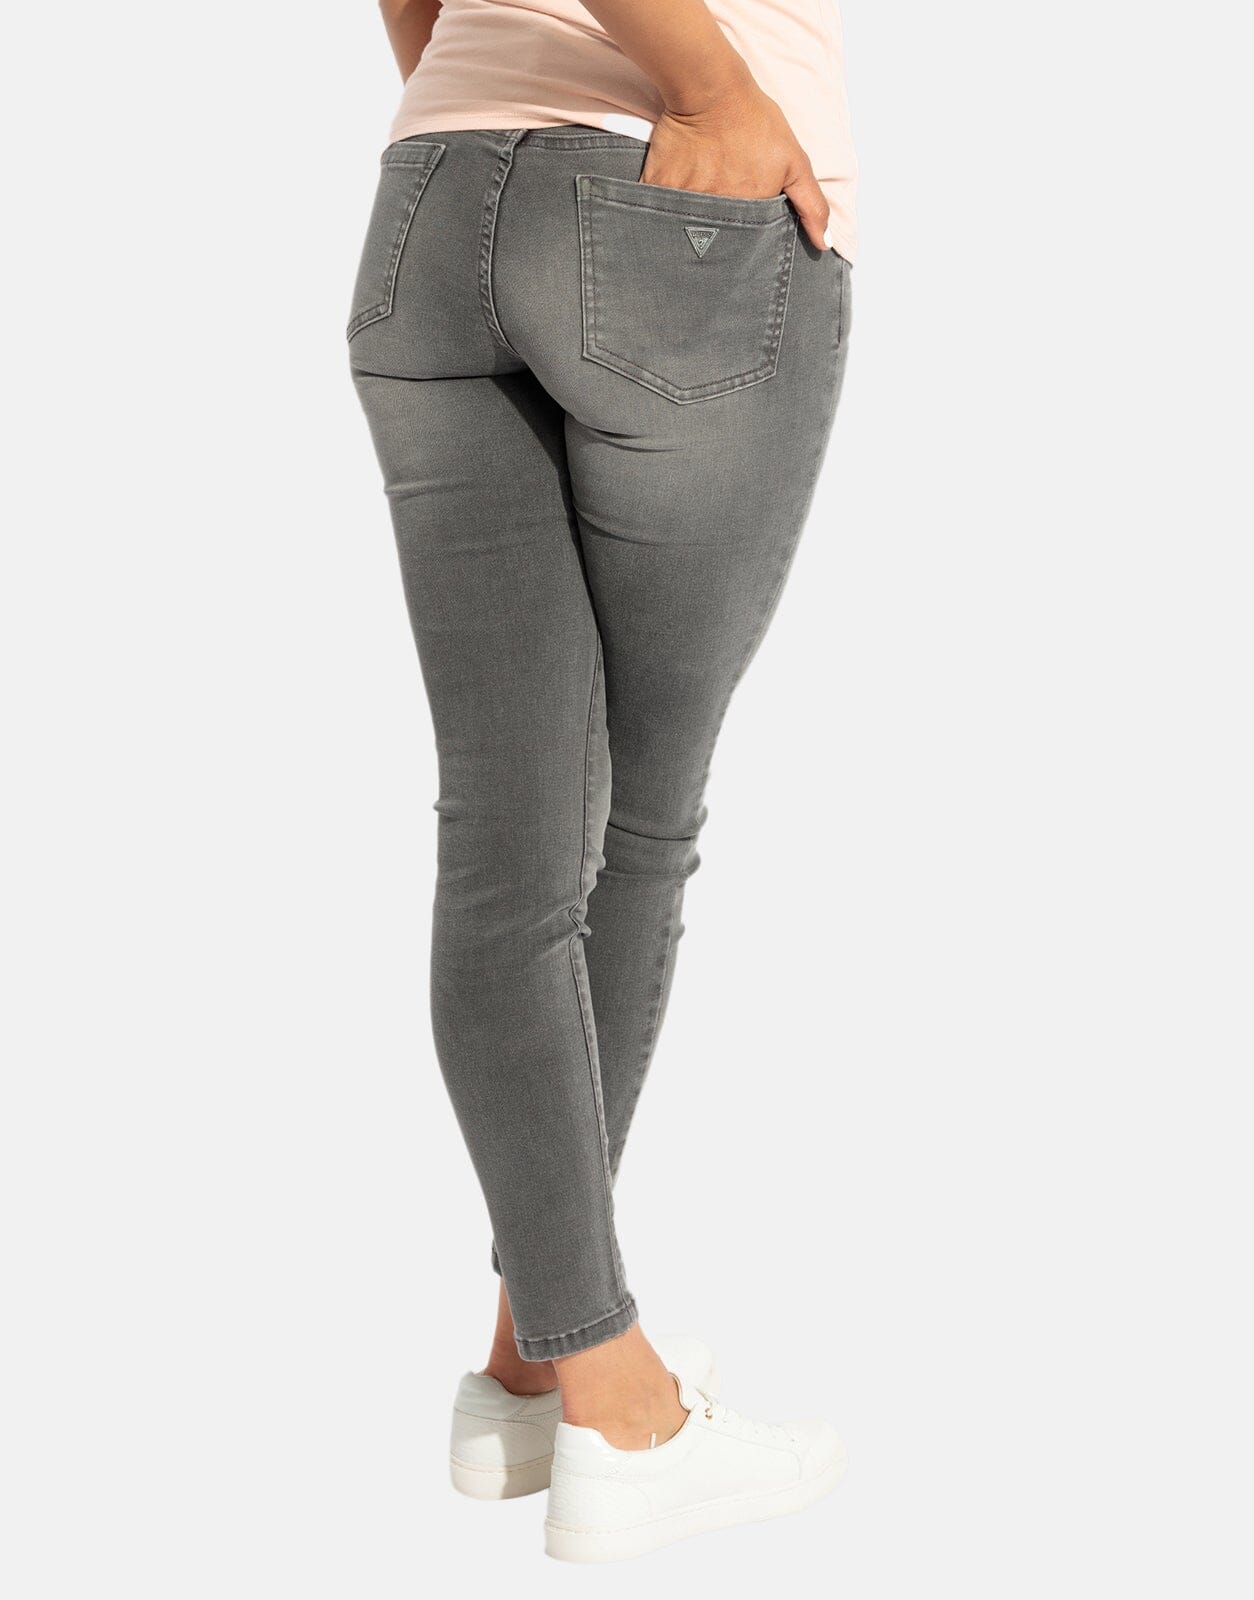 Guess Sexy Curve Grey Wash Jeans - Subwear